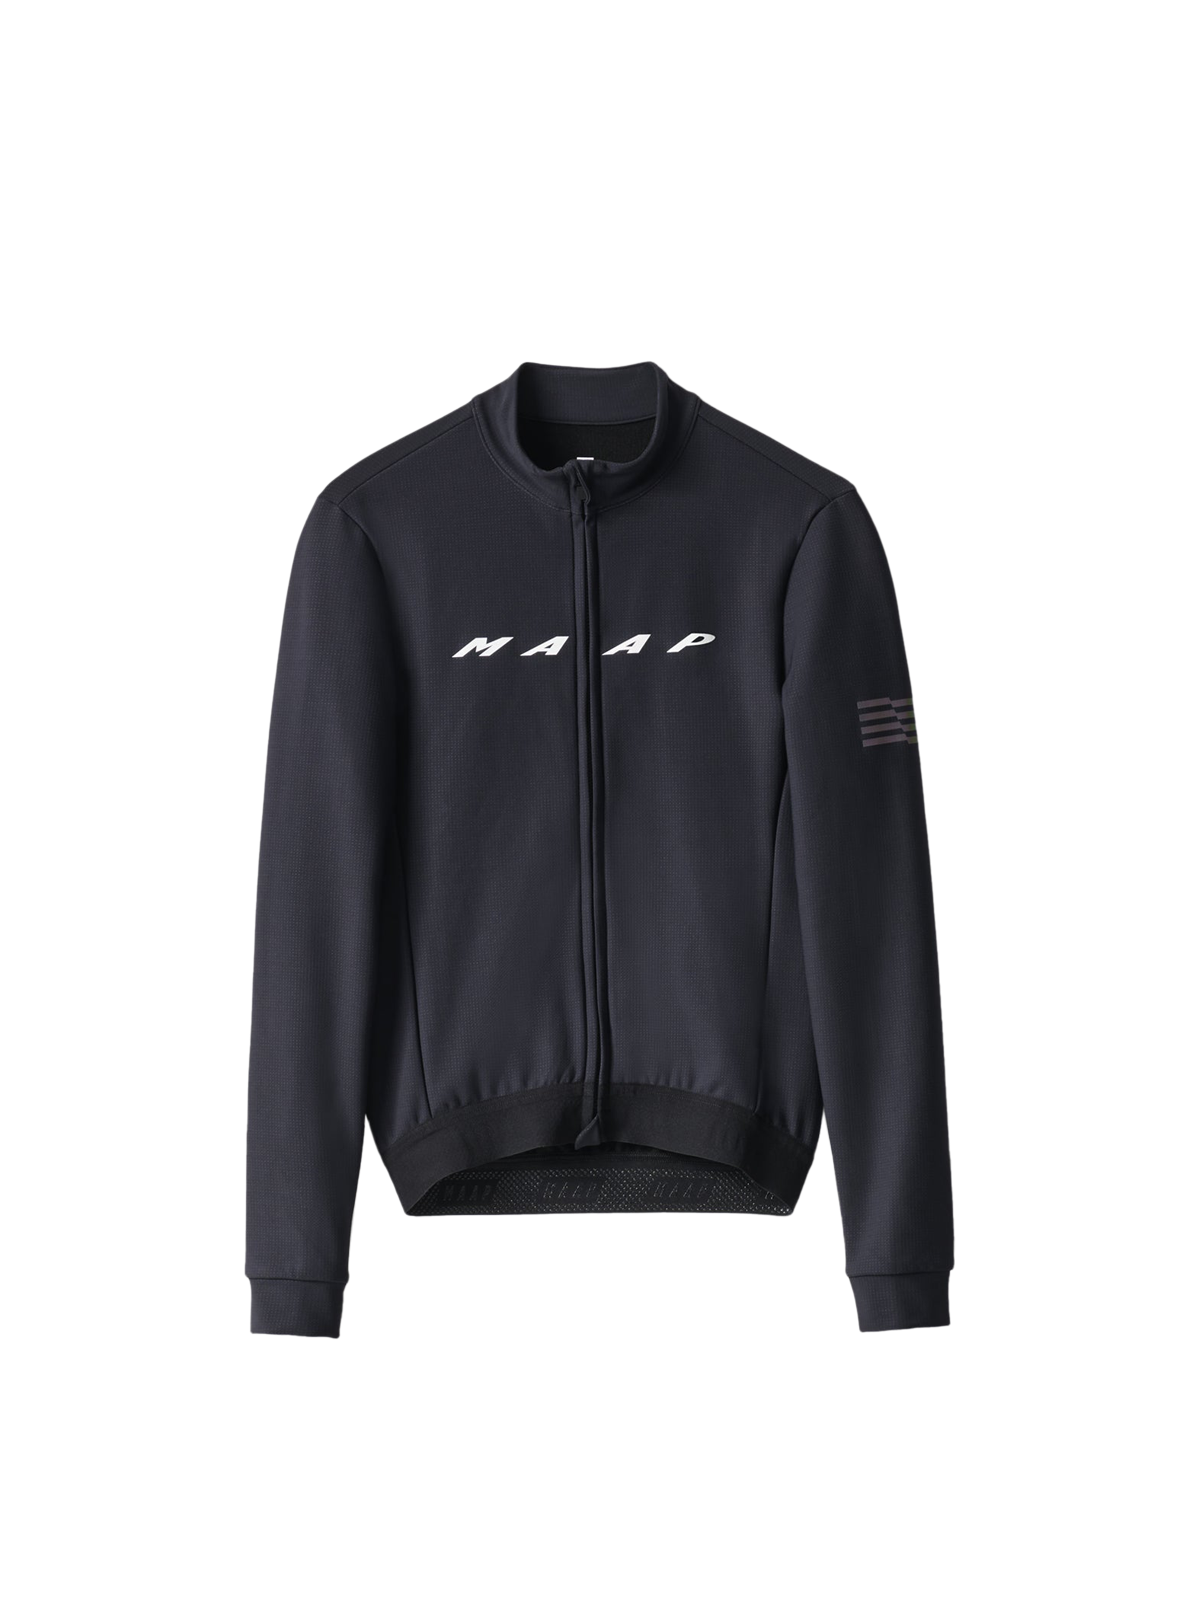 Evade Thermal LS Jersey - MAAP Cycling Apparel